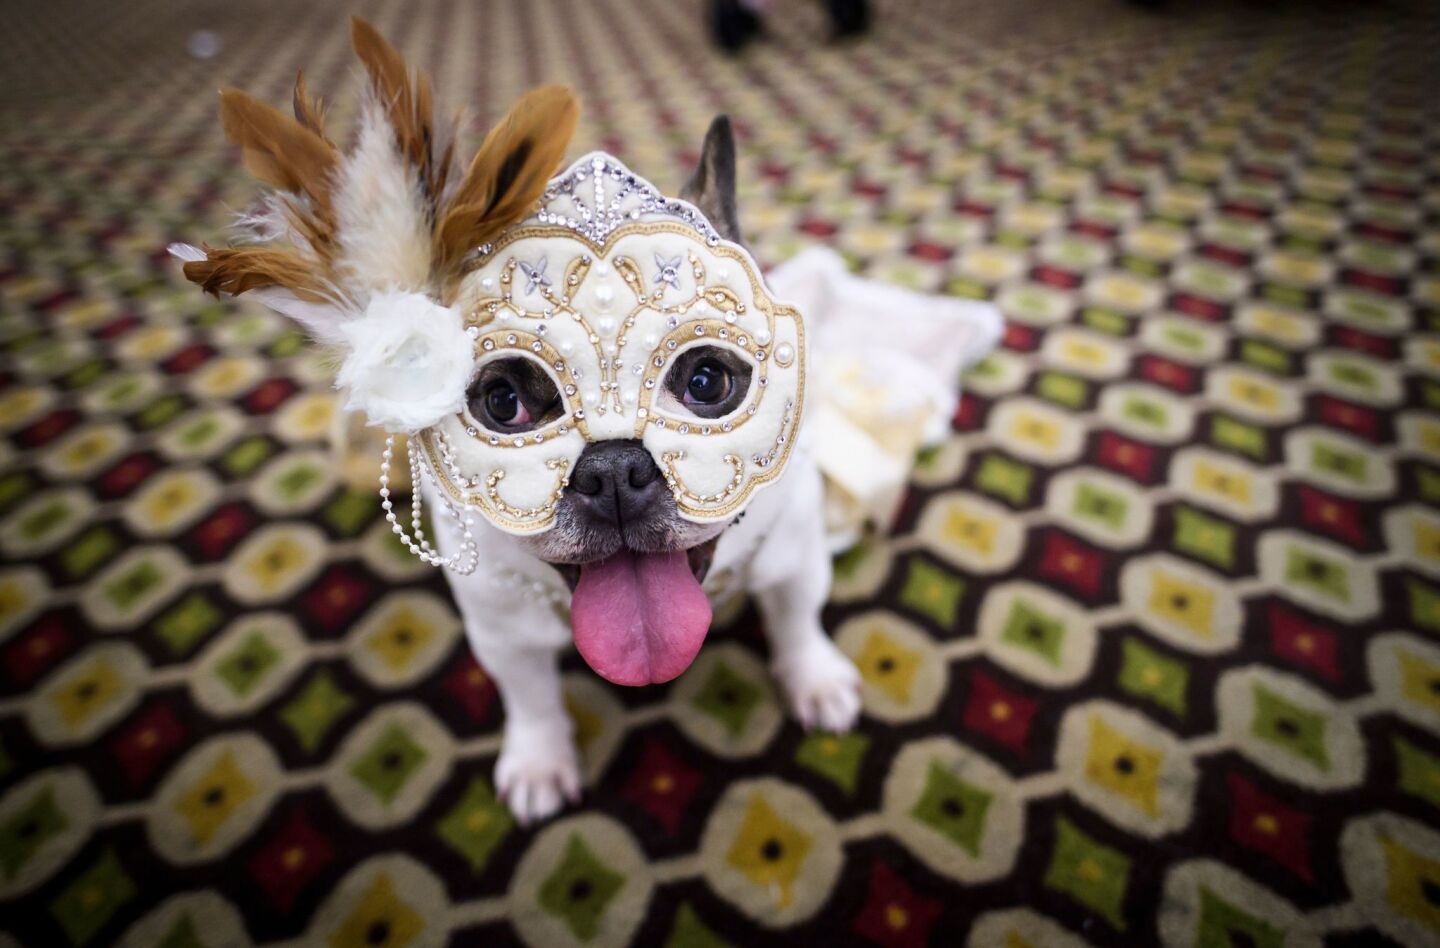 A dog dressed in a masquerade mask and costume sits backstage at the 2019 New York Pet Fashion Show at the Hotel Pennsylvania in Manhattan on Feb. 7, 2019. The theme for this year's show, now in its 16th year, was "Masquerade Ball for Animal Rescue".